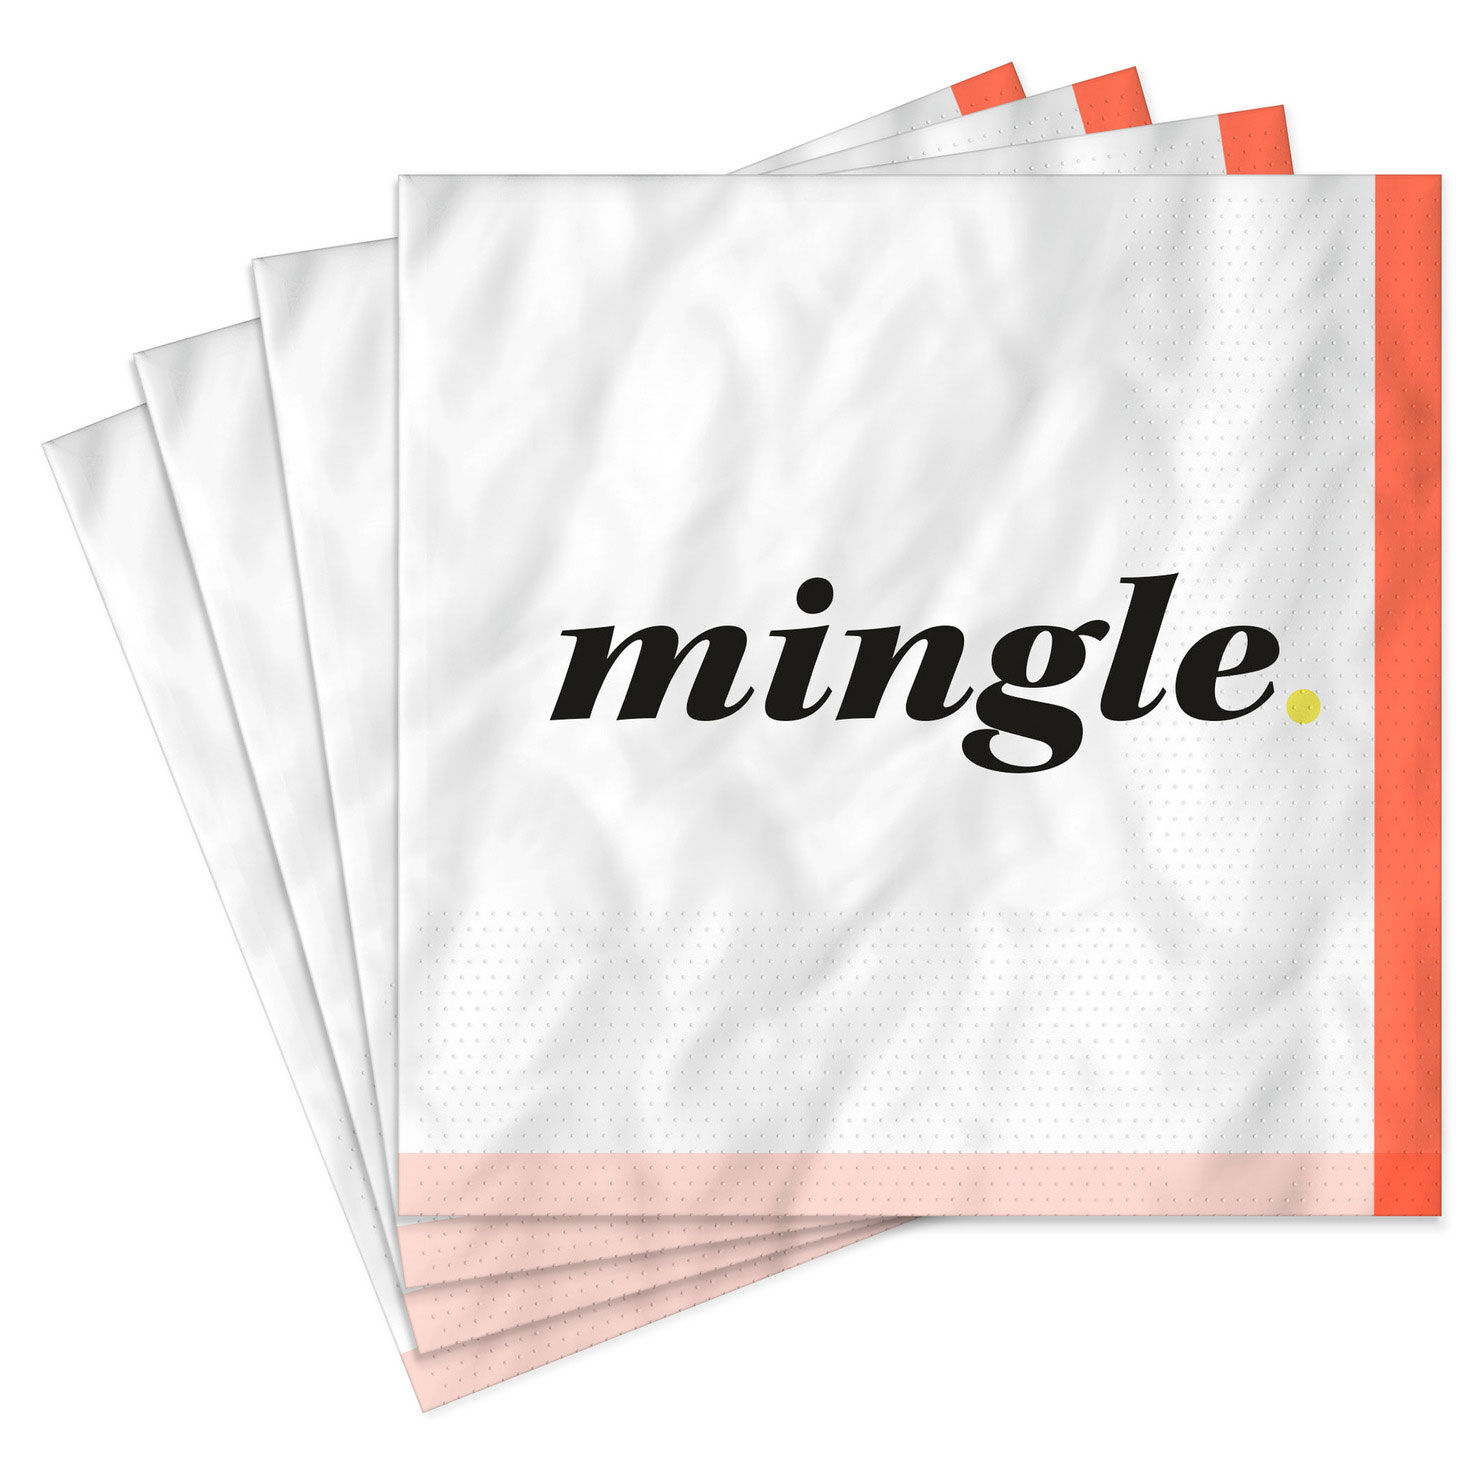 Black and White "Mingle" Cocktail Napkins, Set of 16 for only USD 4.49 | Hallmark